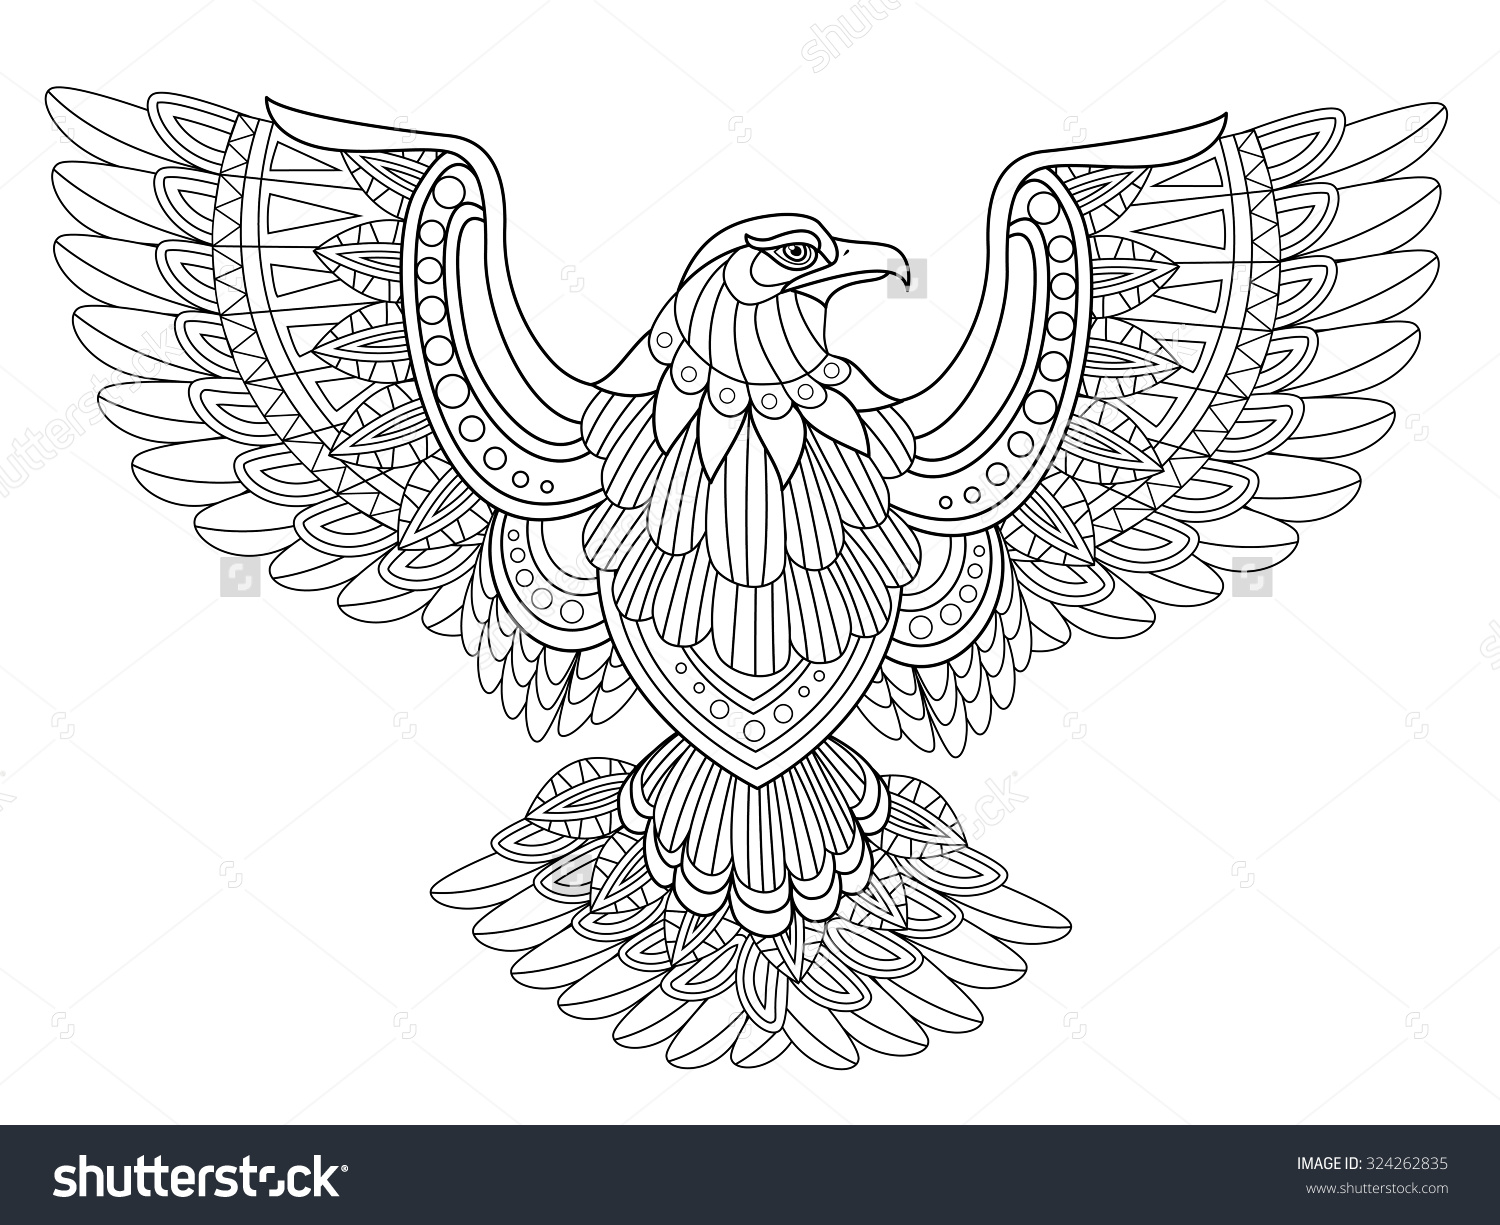 eagle coloring pages for sunday school - photo #38